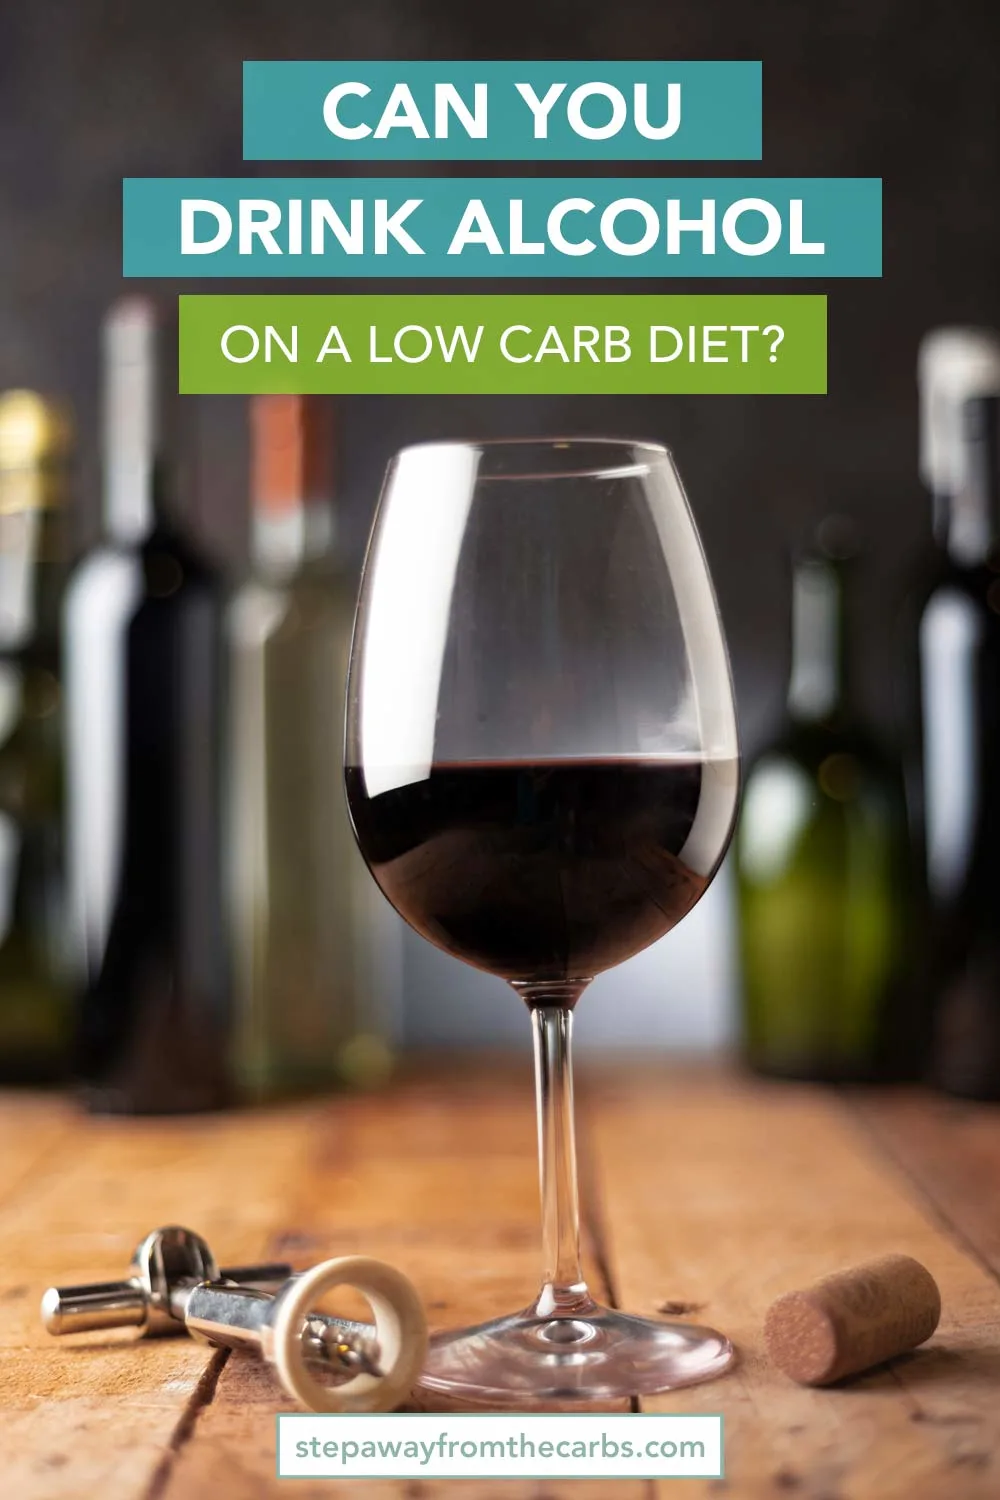 Can You Drink Alcohol on a Low Carb Diet?